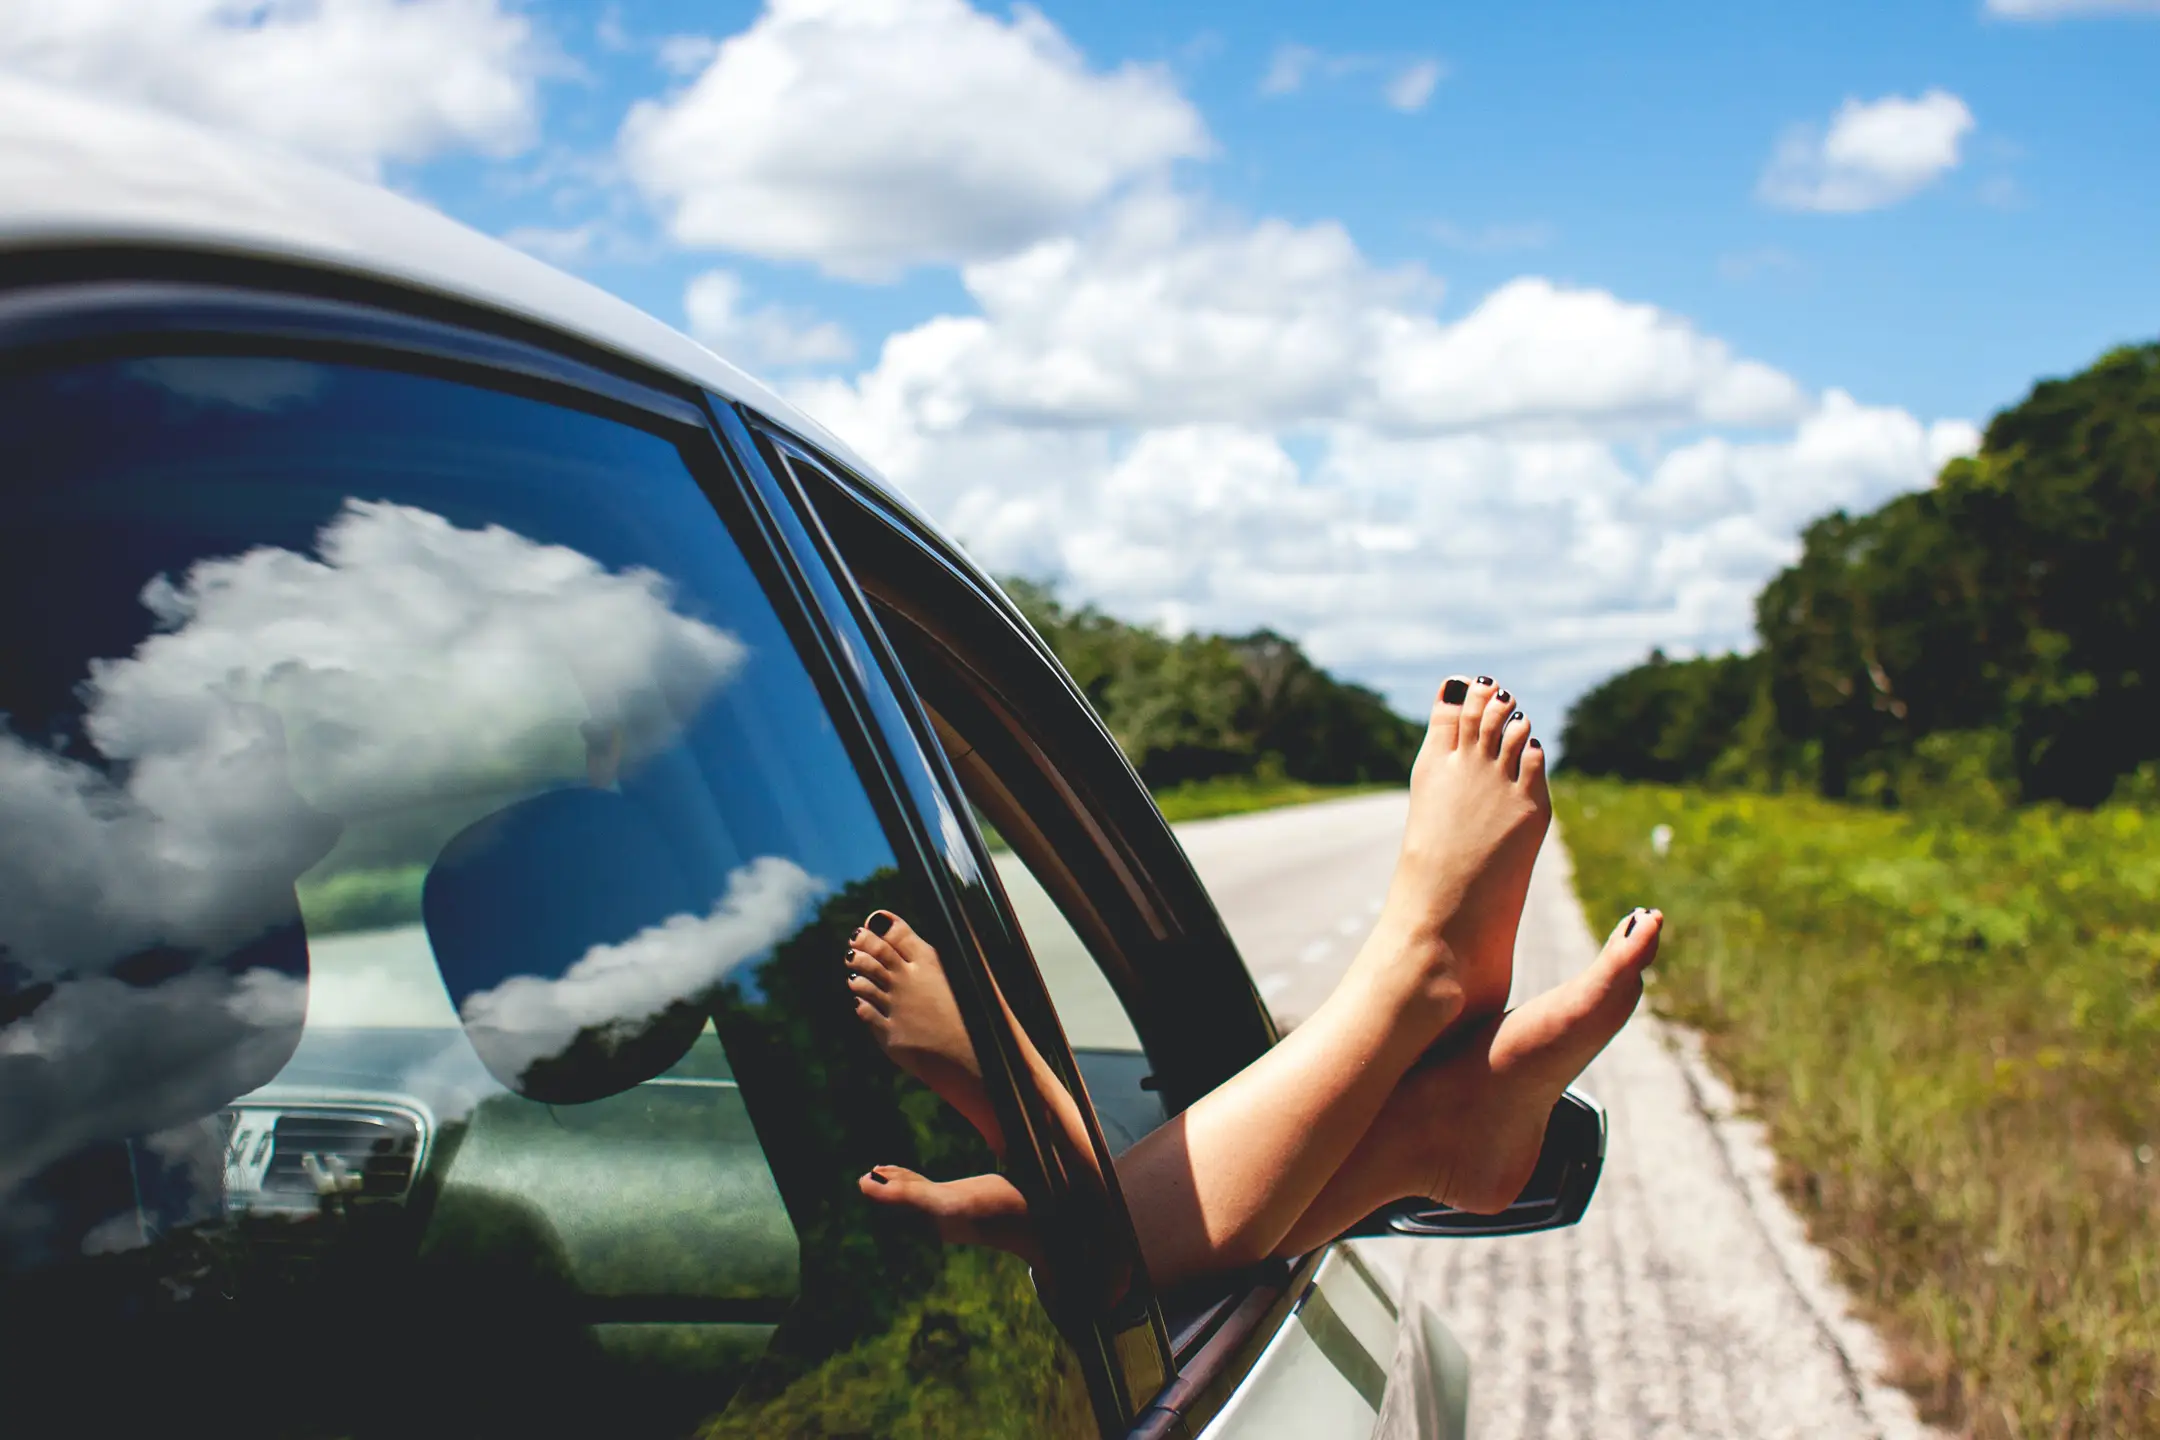 a pair of feet hanging out the window of a car as it travels down a road